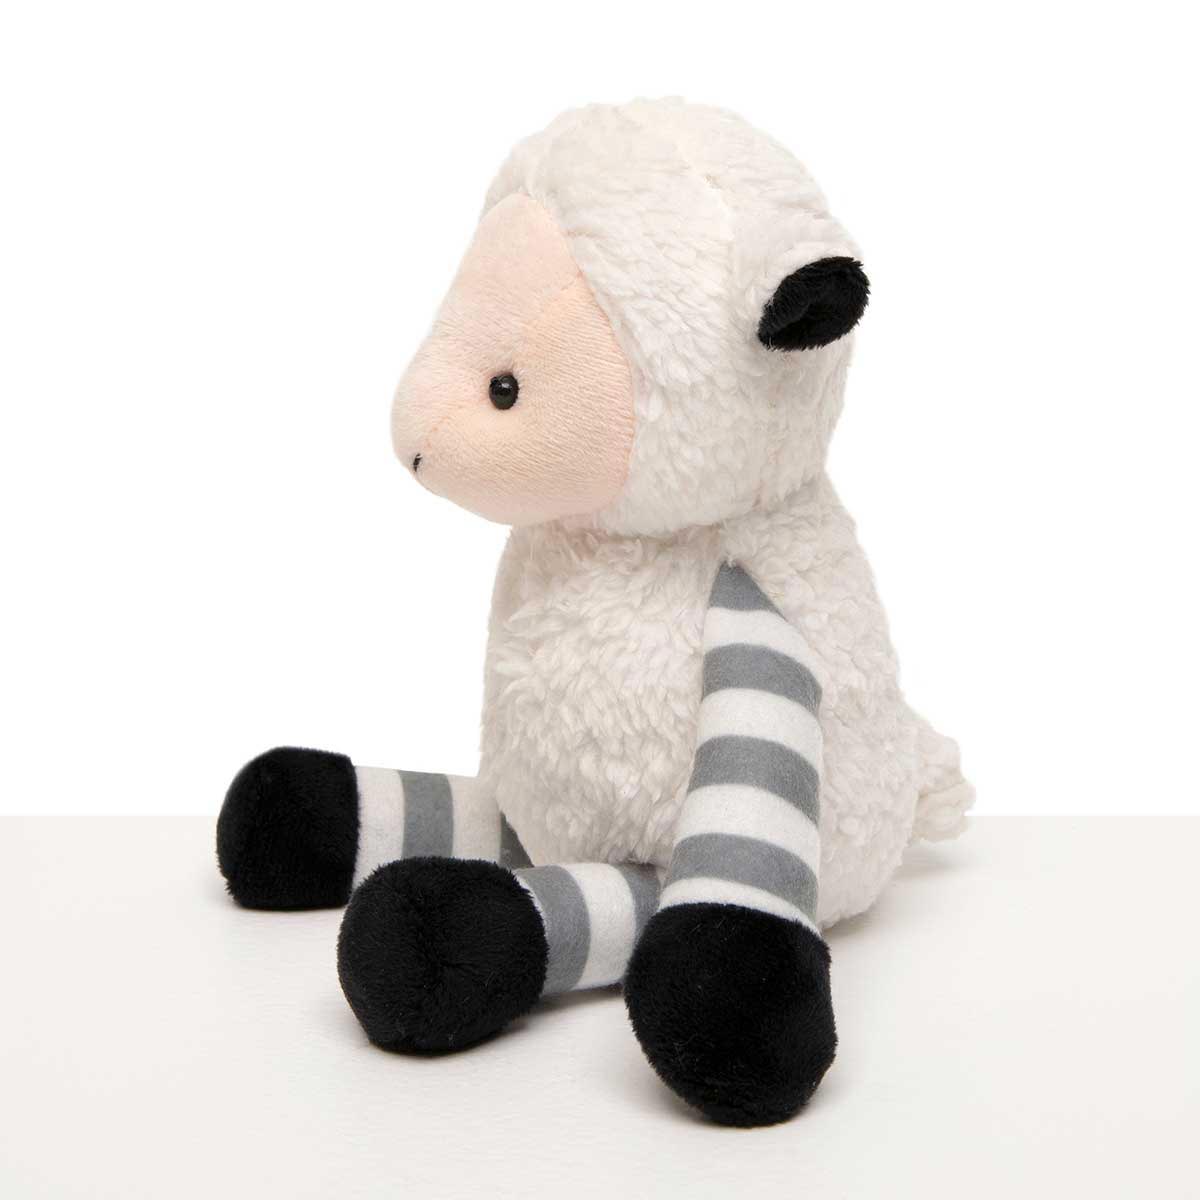 PLUSH LAMB WITH STRIPED ARMS 5.5IN X 4IN X 6IN WHITE/GREY